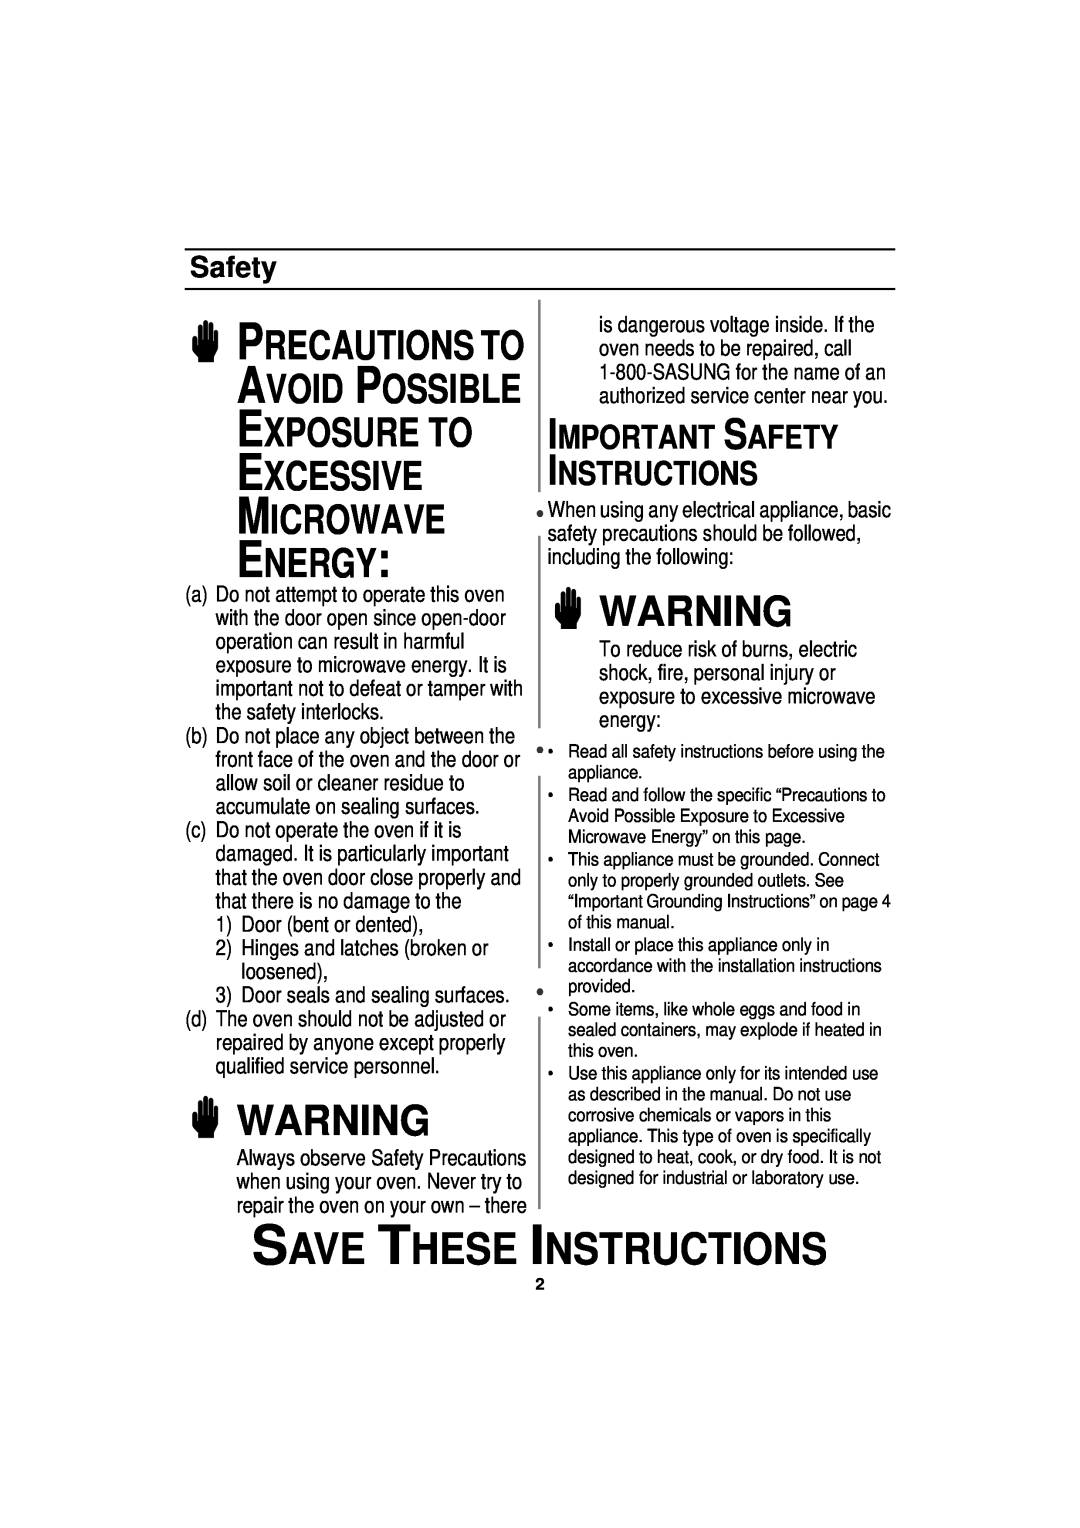 Samsung MW830WA owner manual Save These Instructions, Precautions To Avoid Possible, Important Safety Instructions 